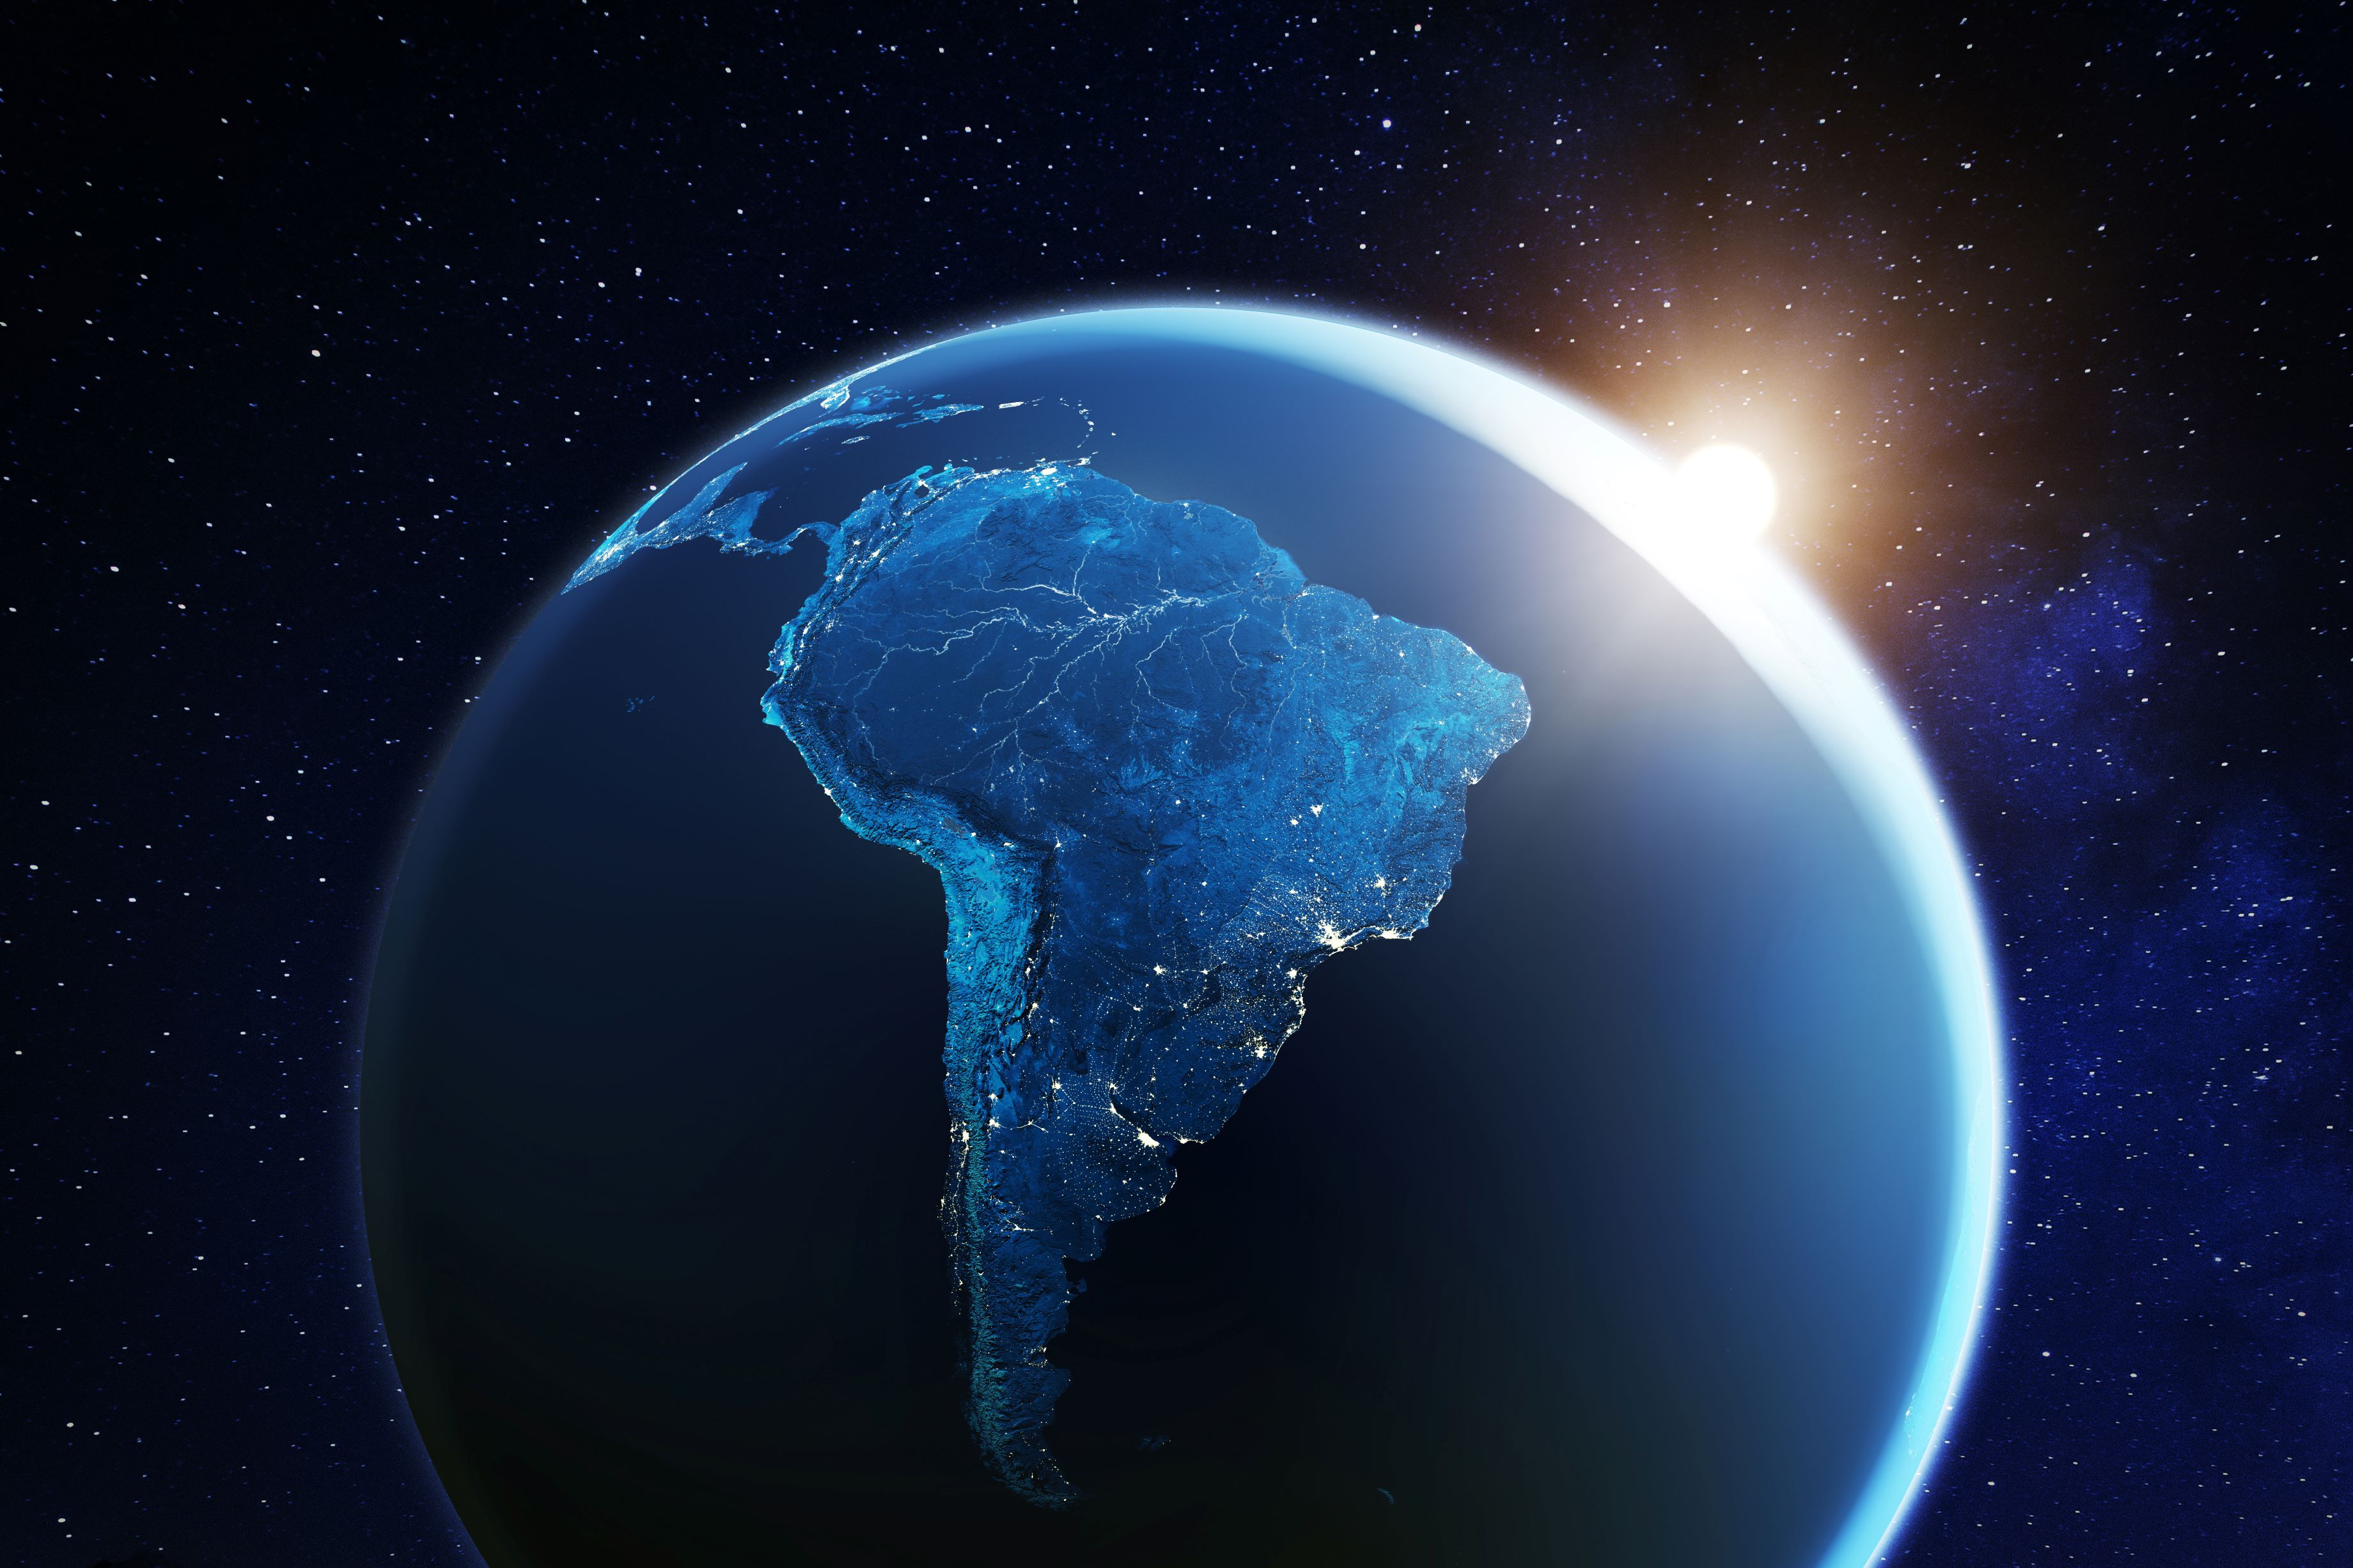 Latin America from space